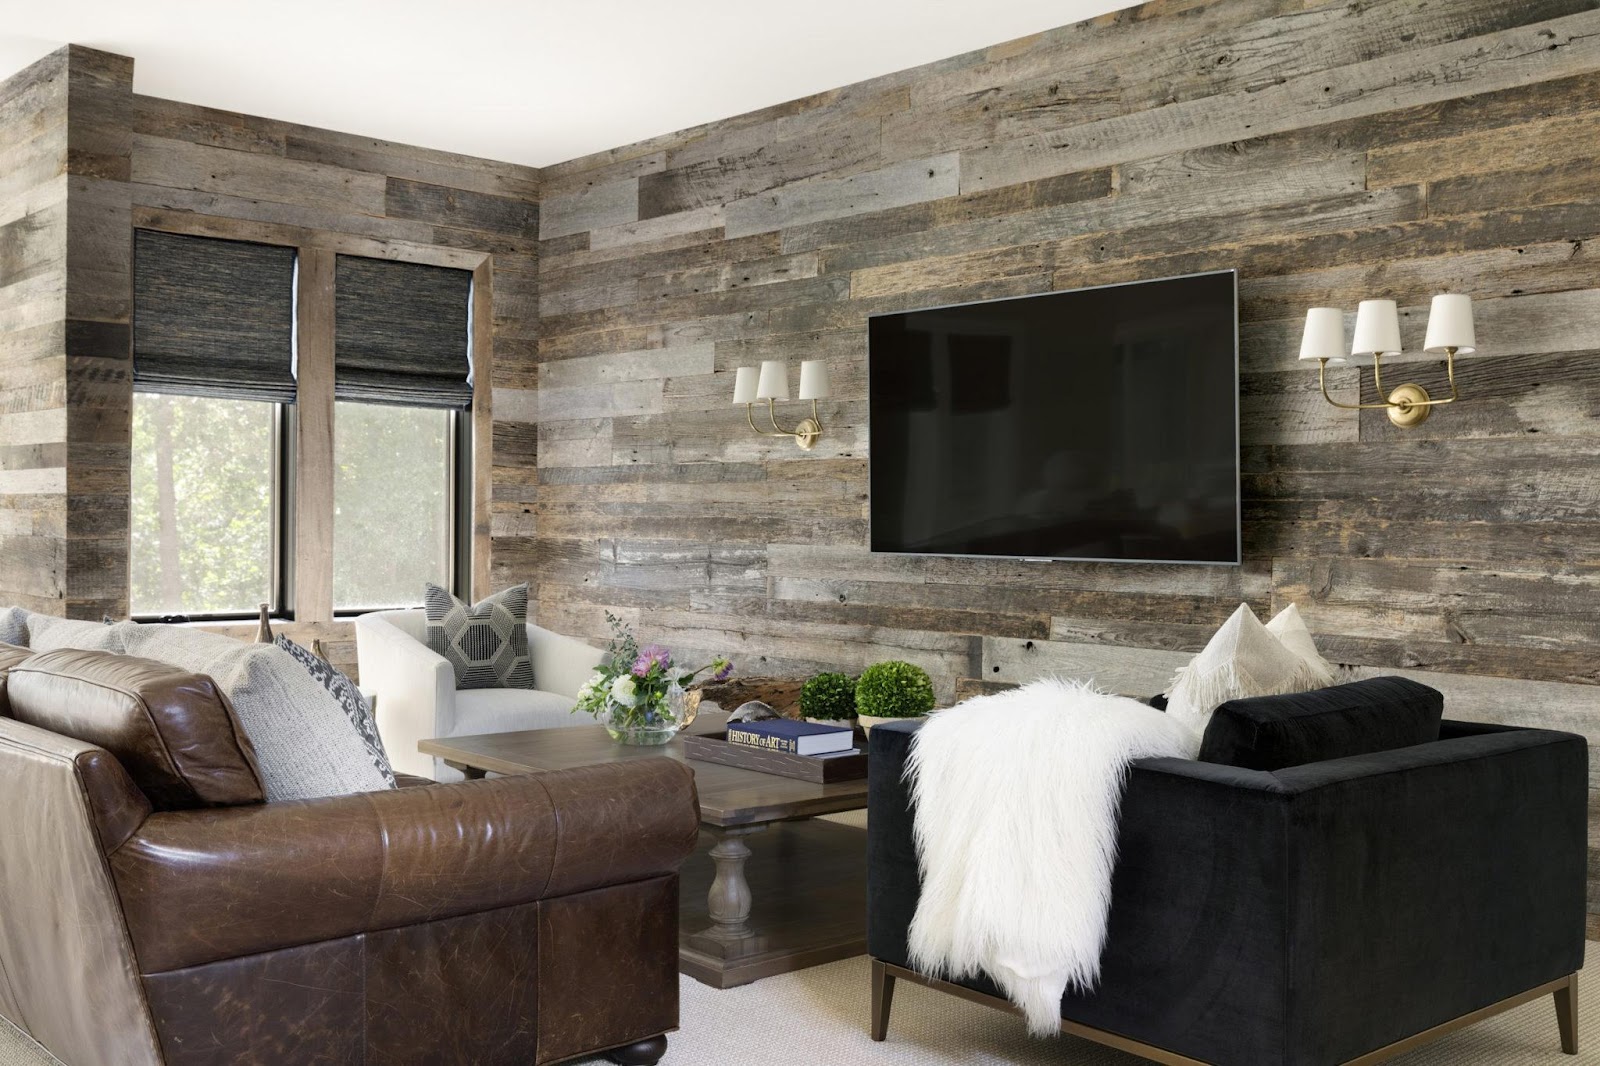 A family room with custom rustic wood walls